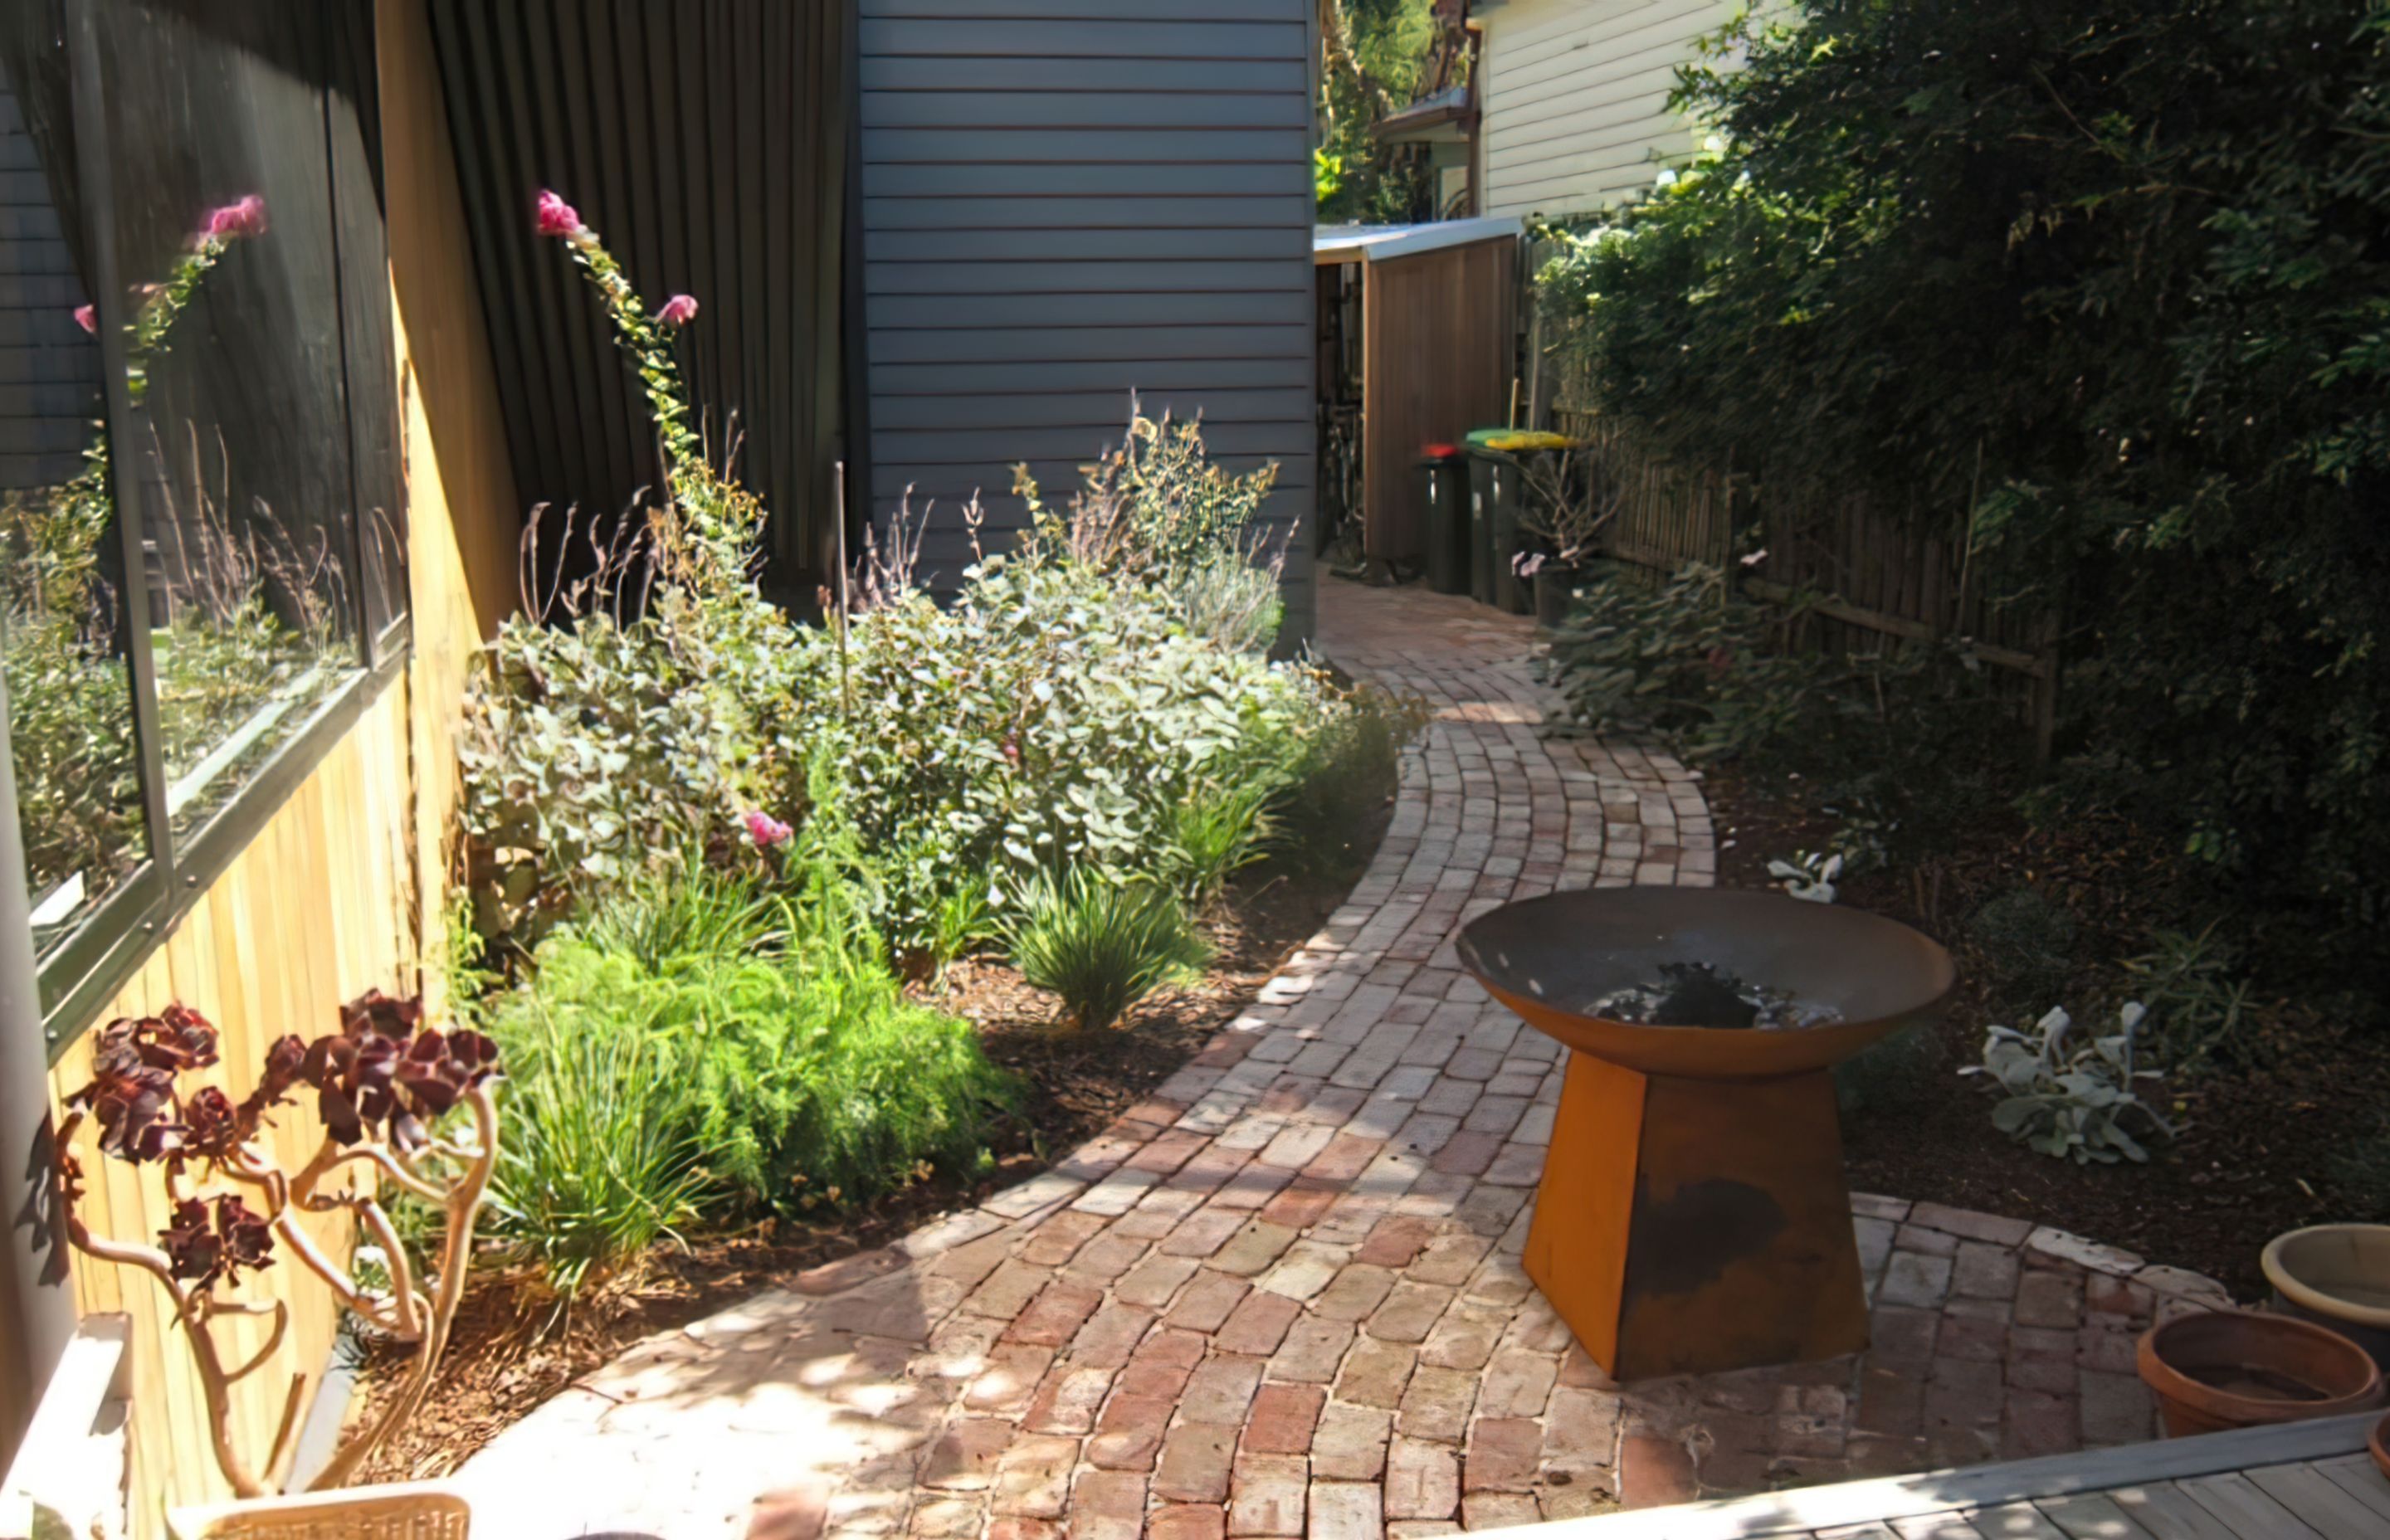 AFTER the garden design. A sinuous red brick path enters the deck at a small gathering node where a firepit is placed